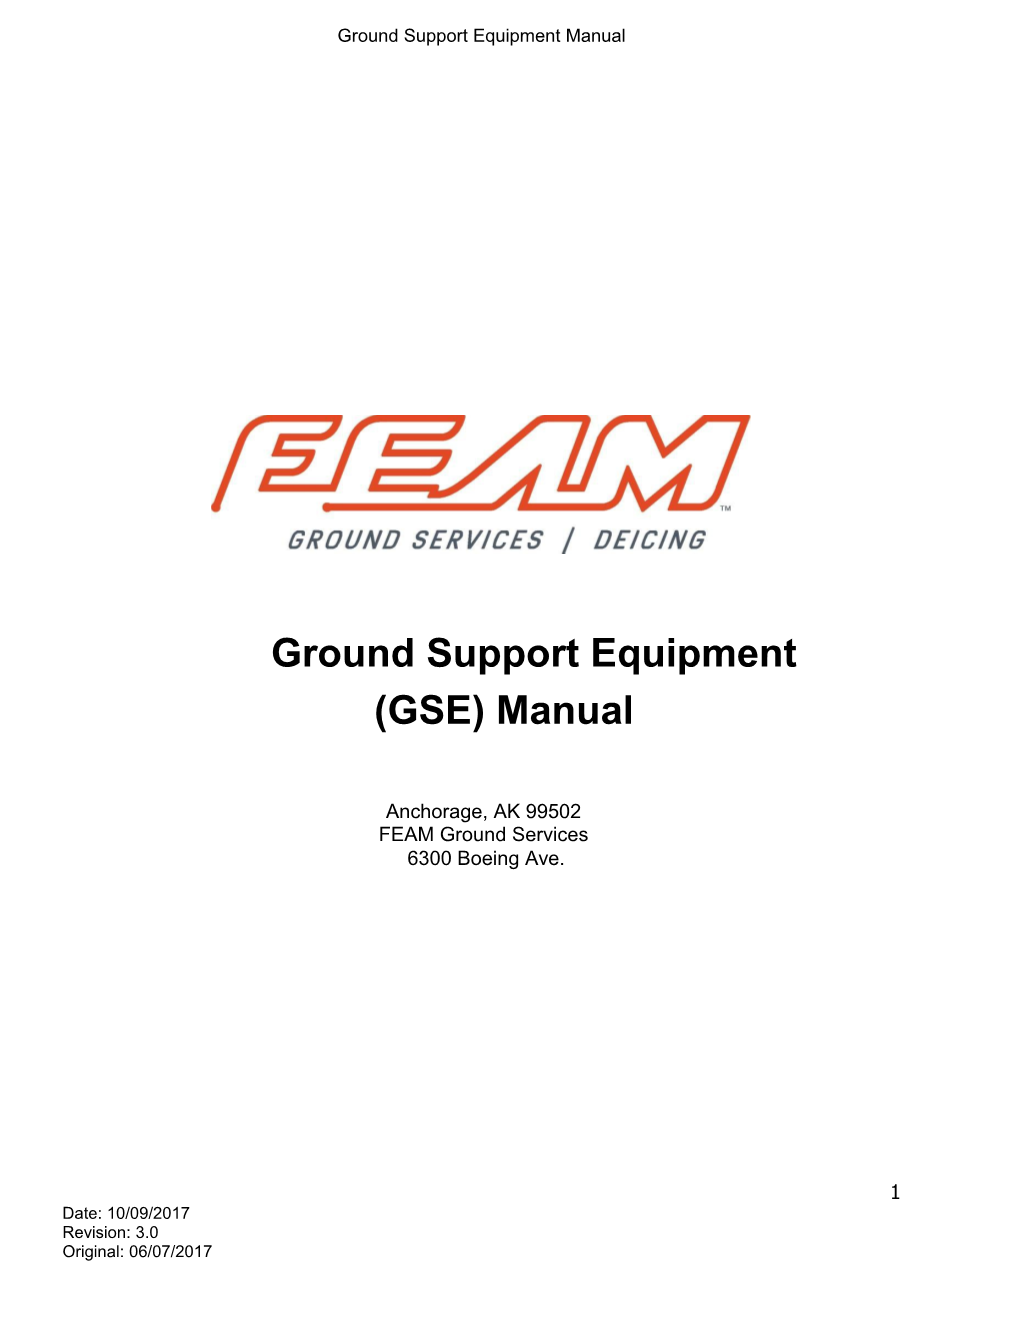 Ground Support Equipment (GSE) Manual